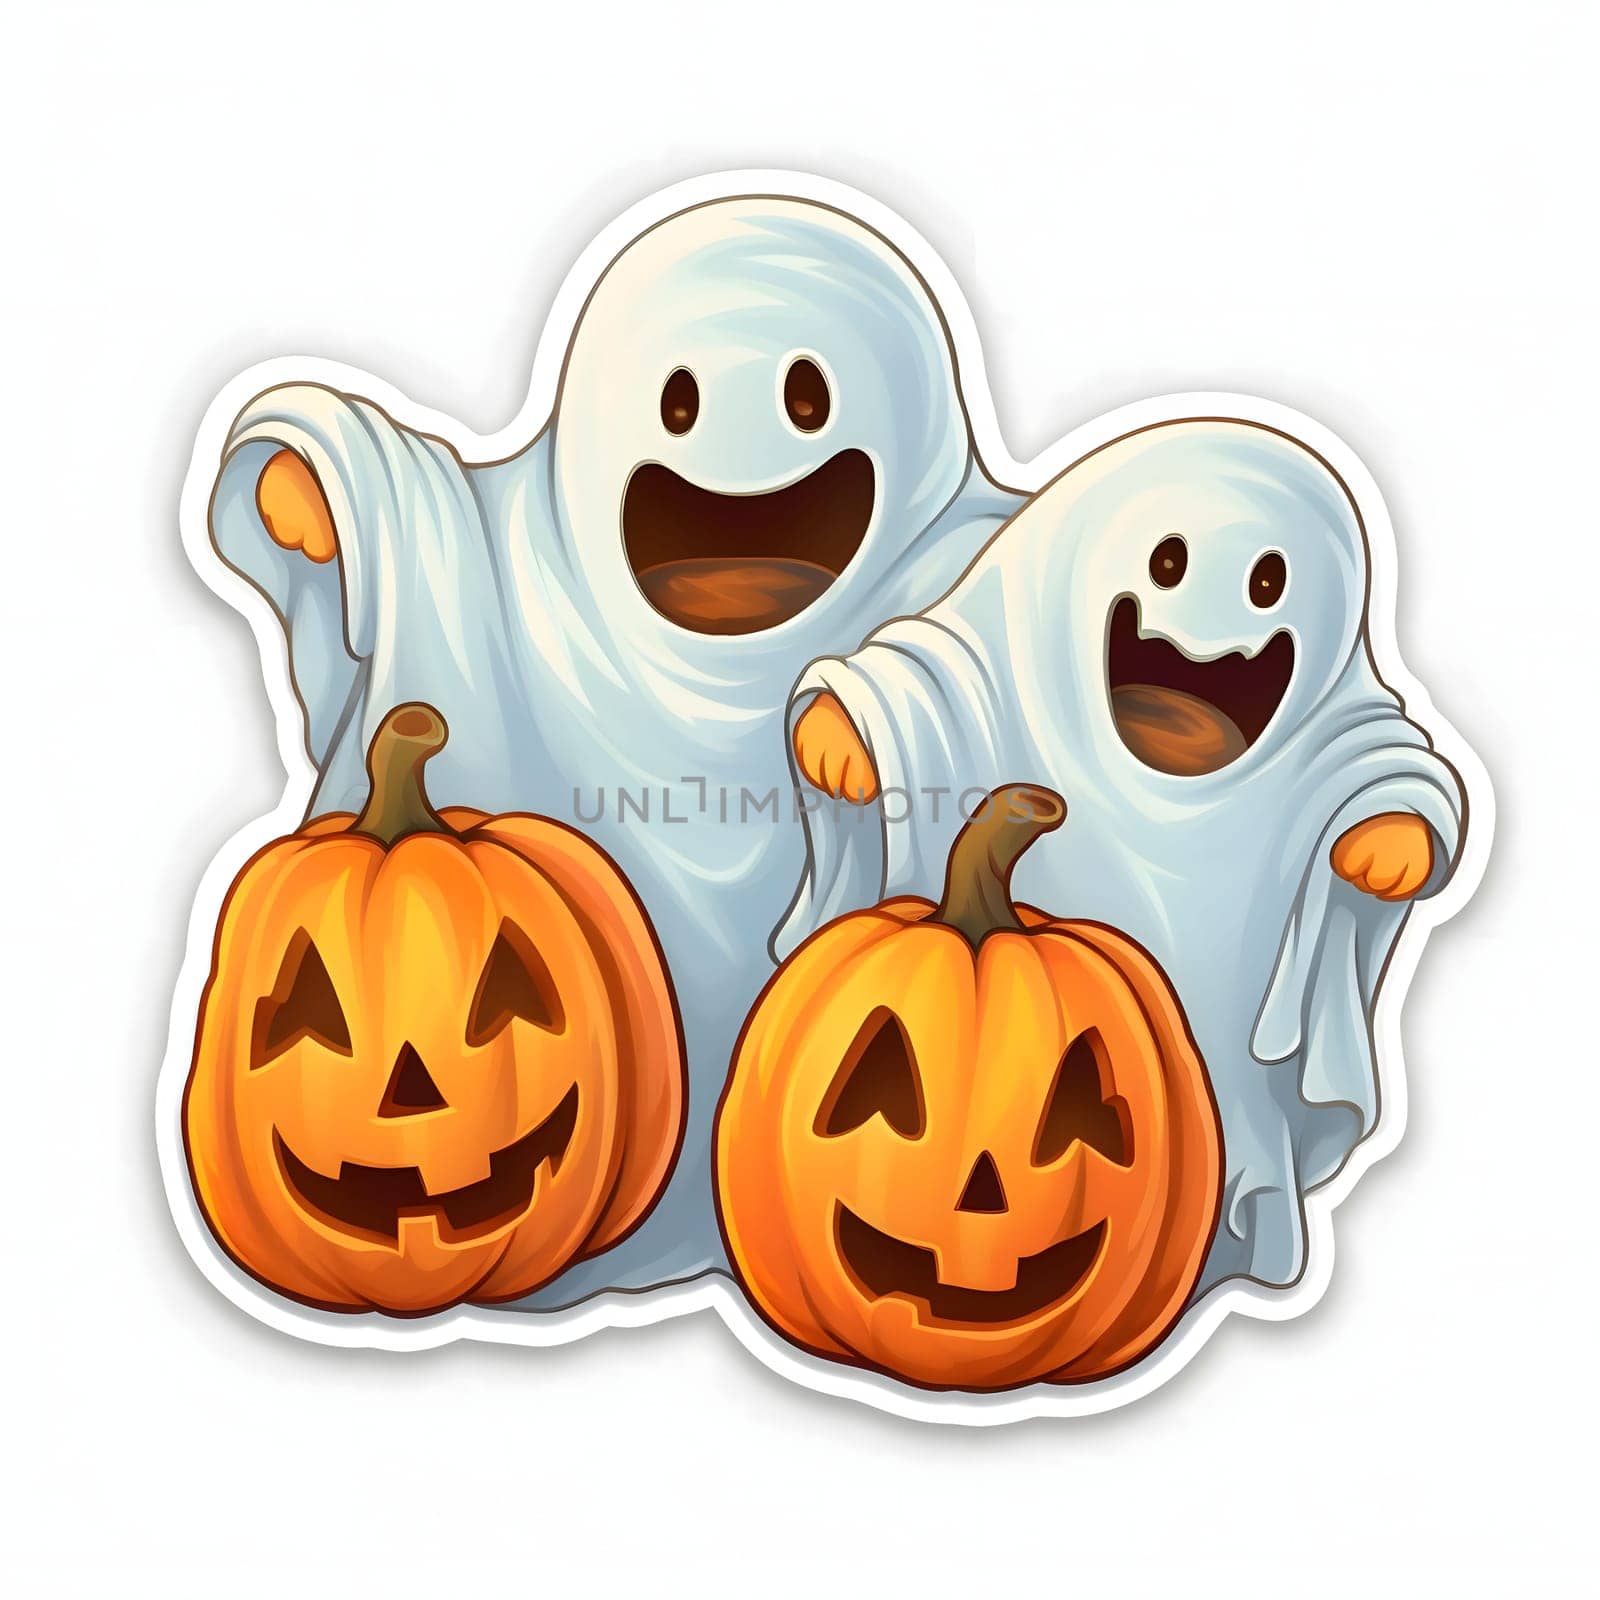 Stickers two frightened ghosts and jack-o-lantern pumpkins, Halloween image on a white isolated background. Atmosphere of darkness and fear.